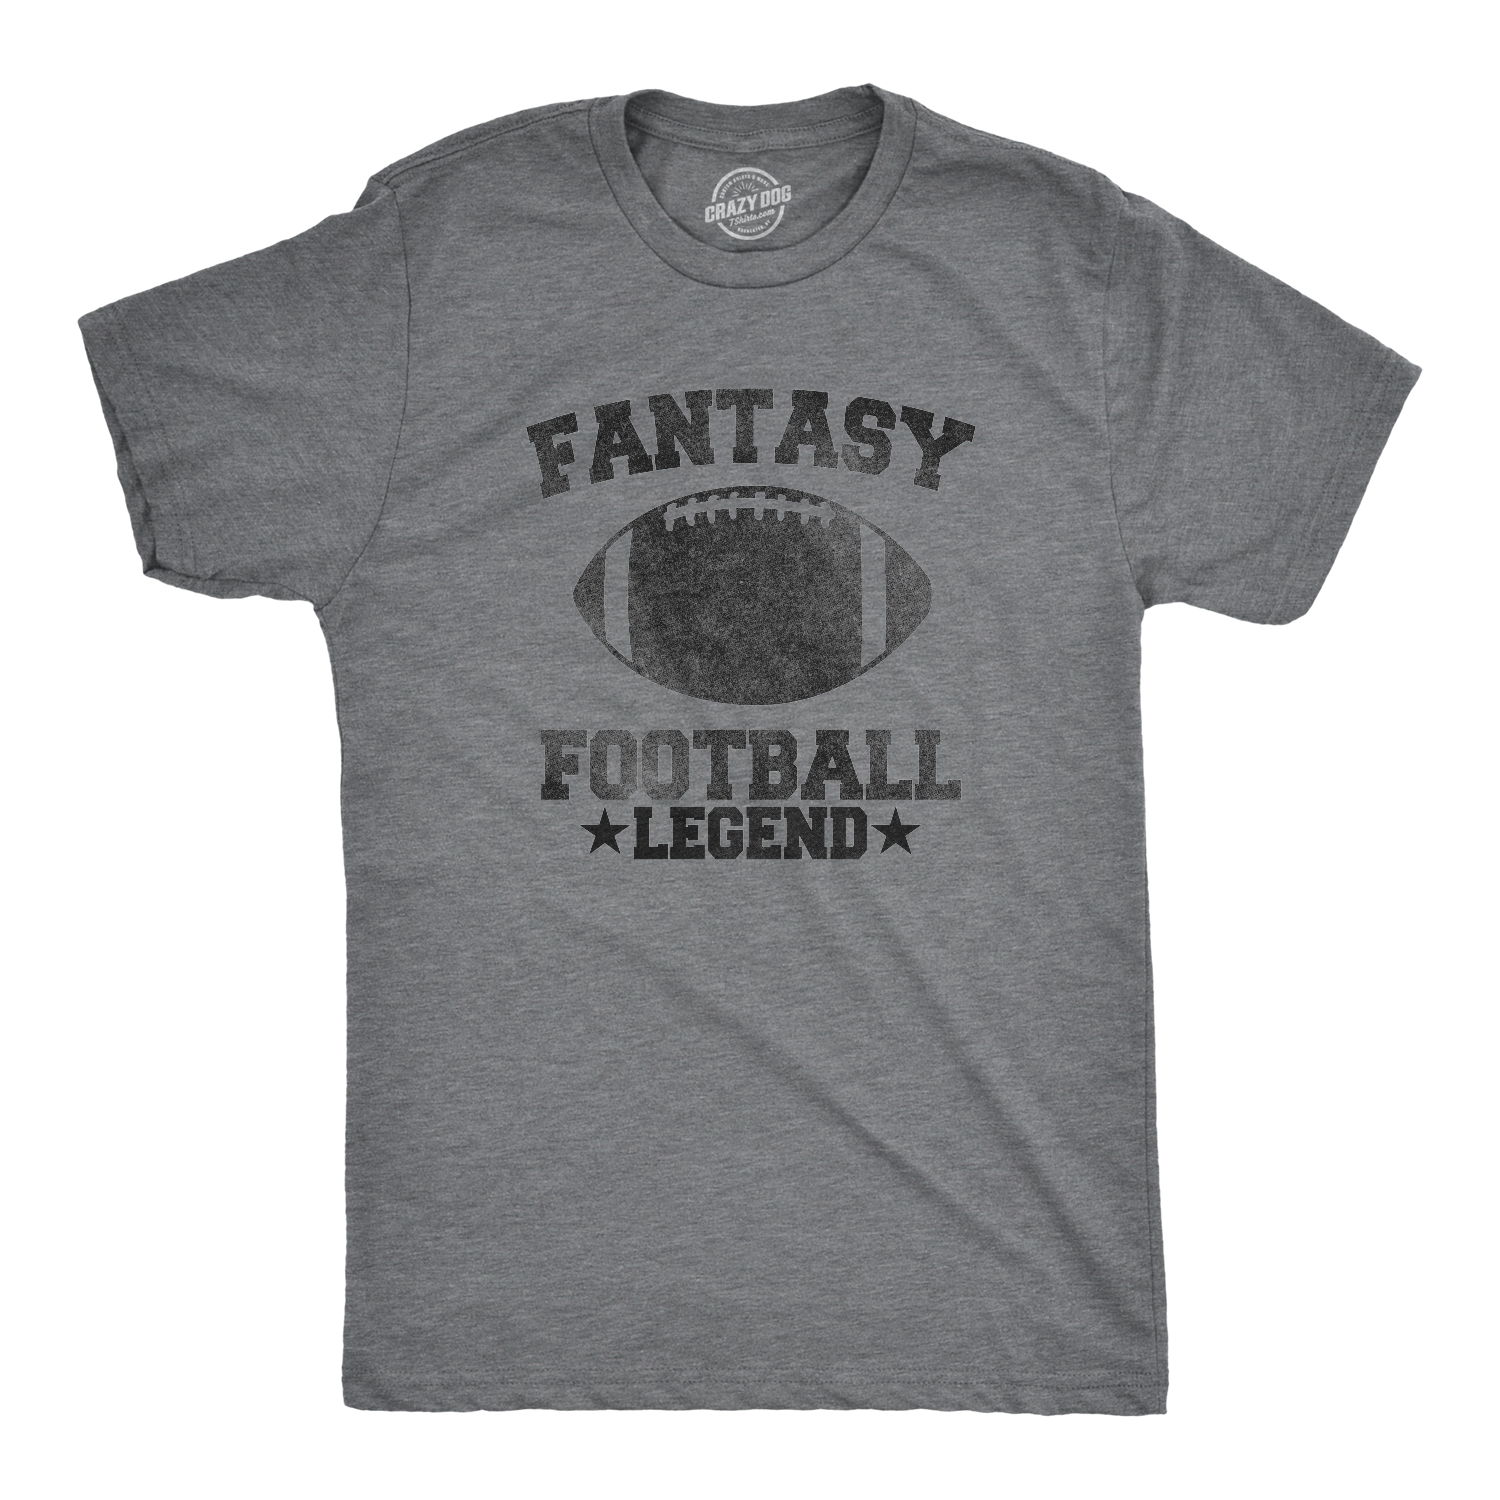 Mens Fantasy Football Legend Funny T shirt Season Novelty Graphic Dad Gameday Graphic Tees - image 1 of 10